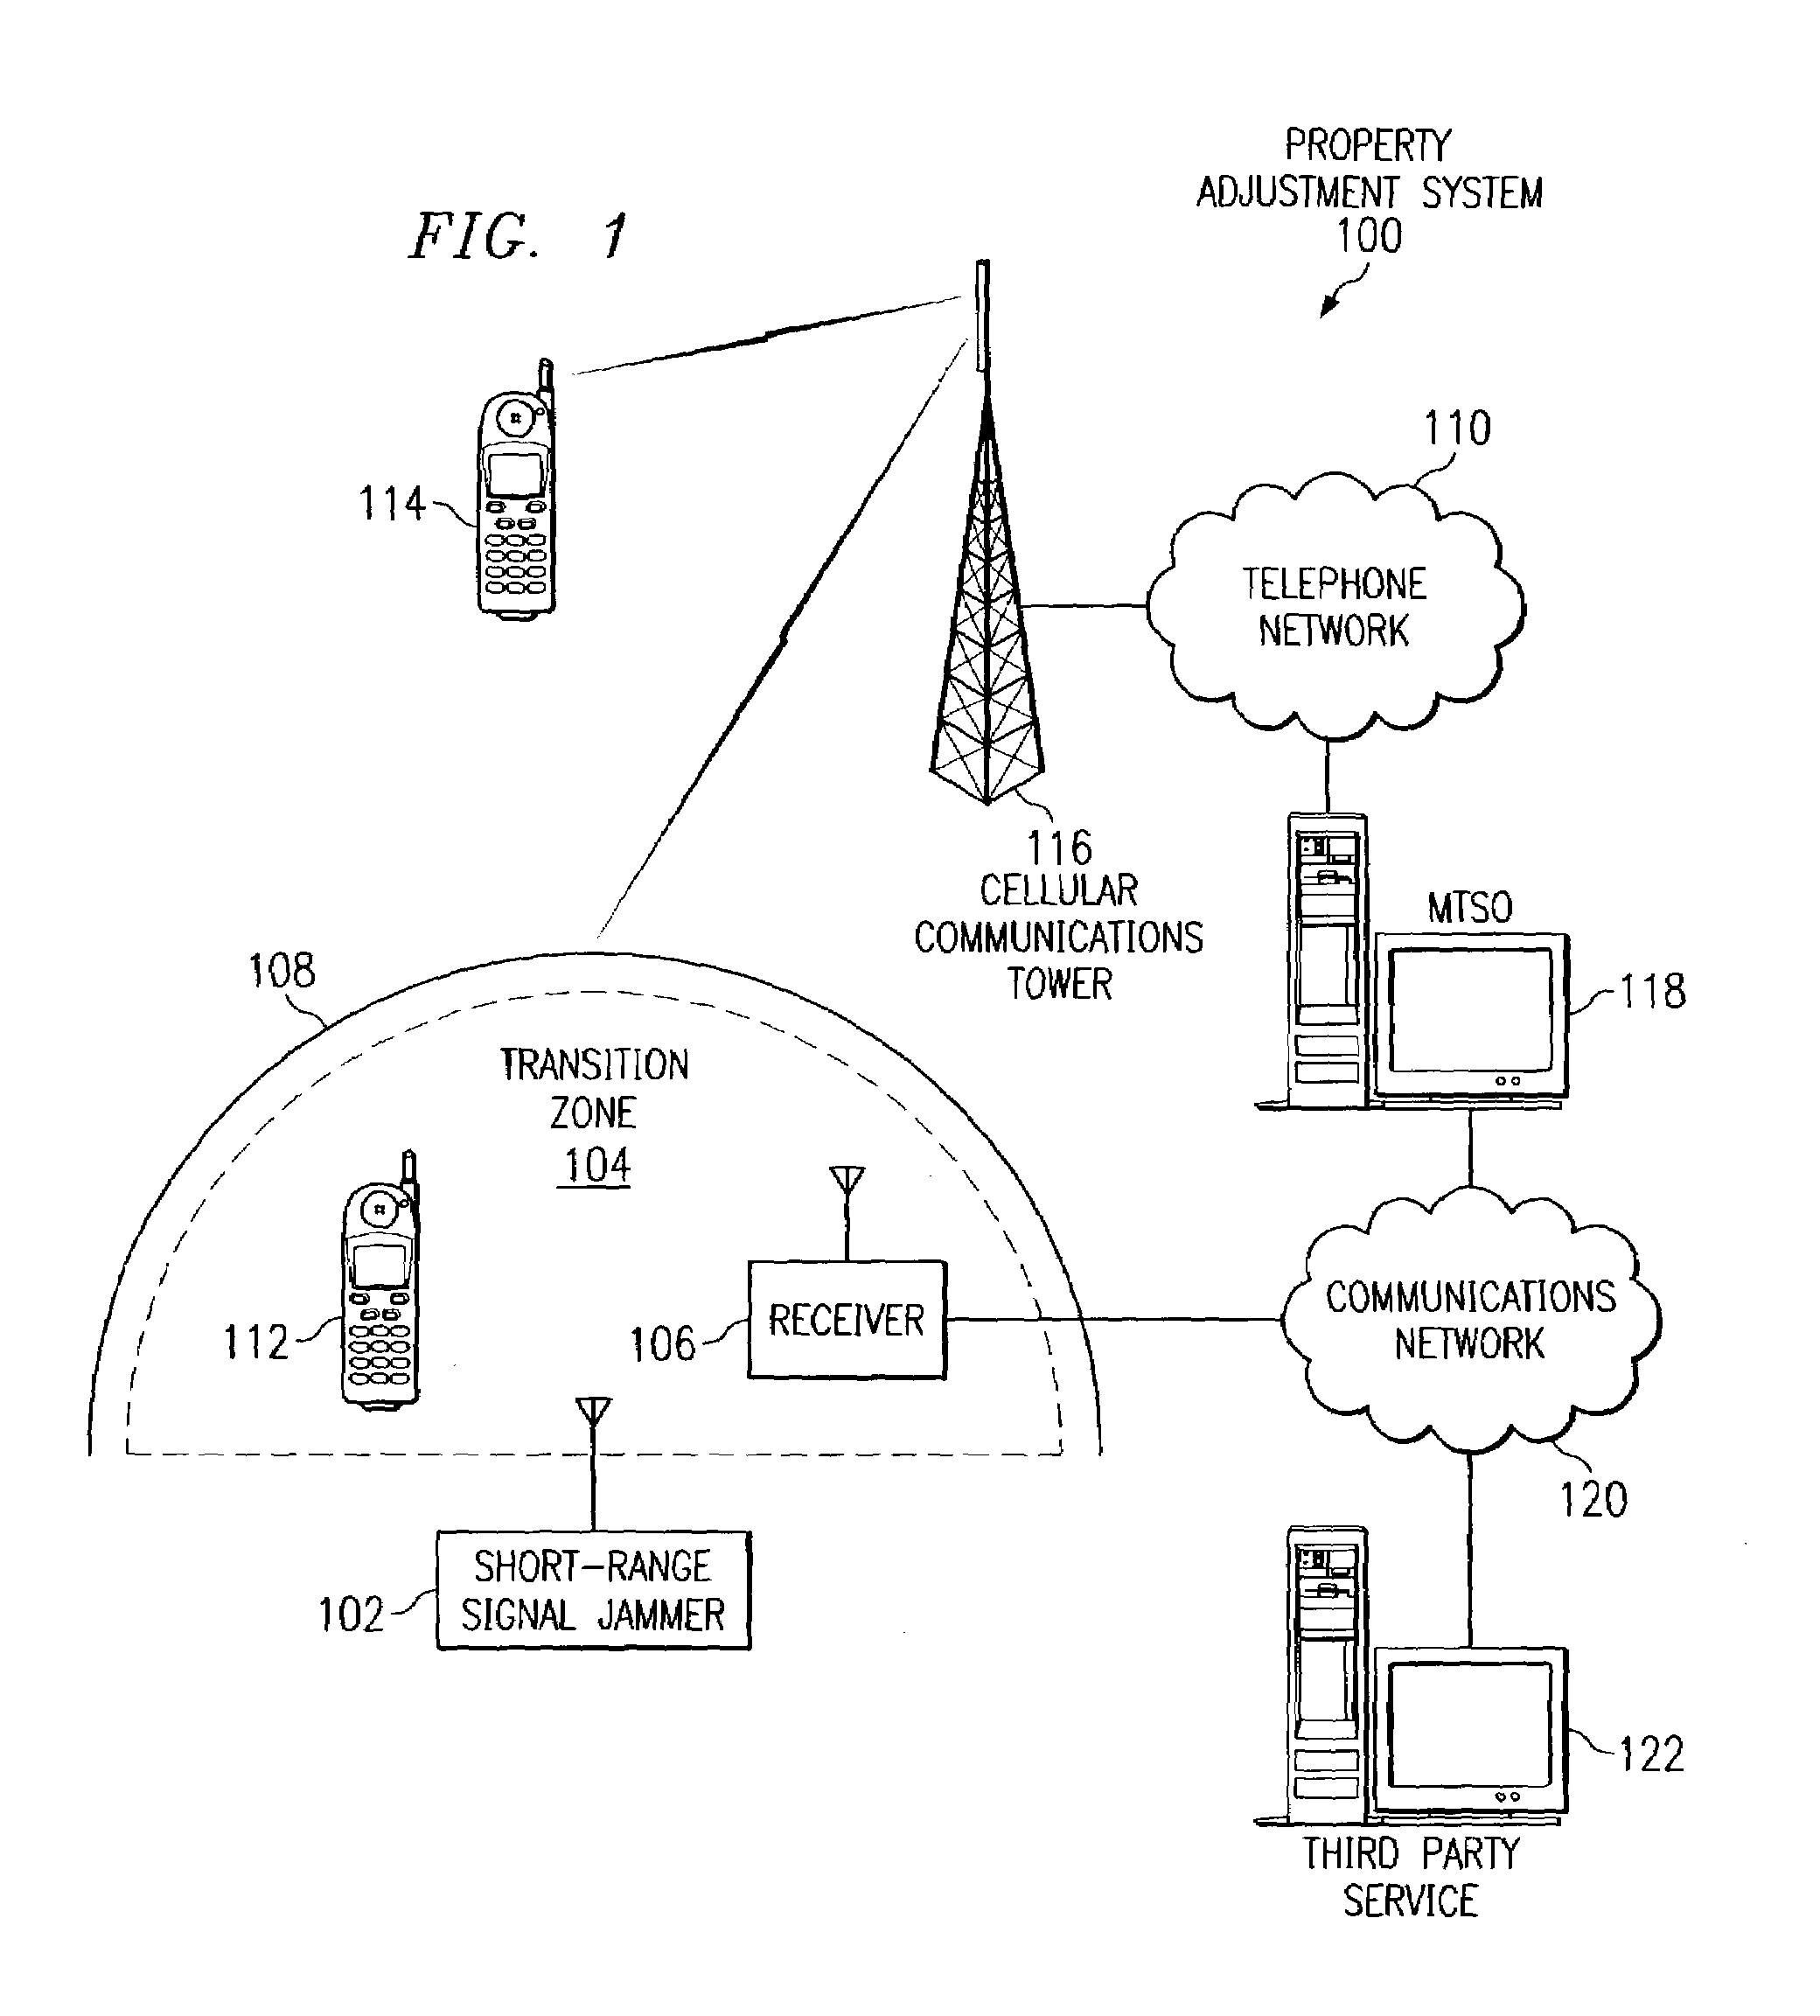 Method, apparatus, and program for automated property adjustment in a cellular network